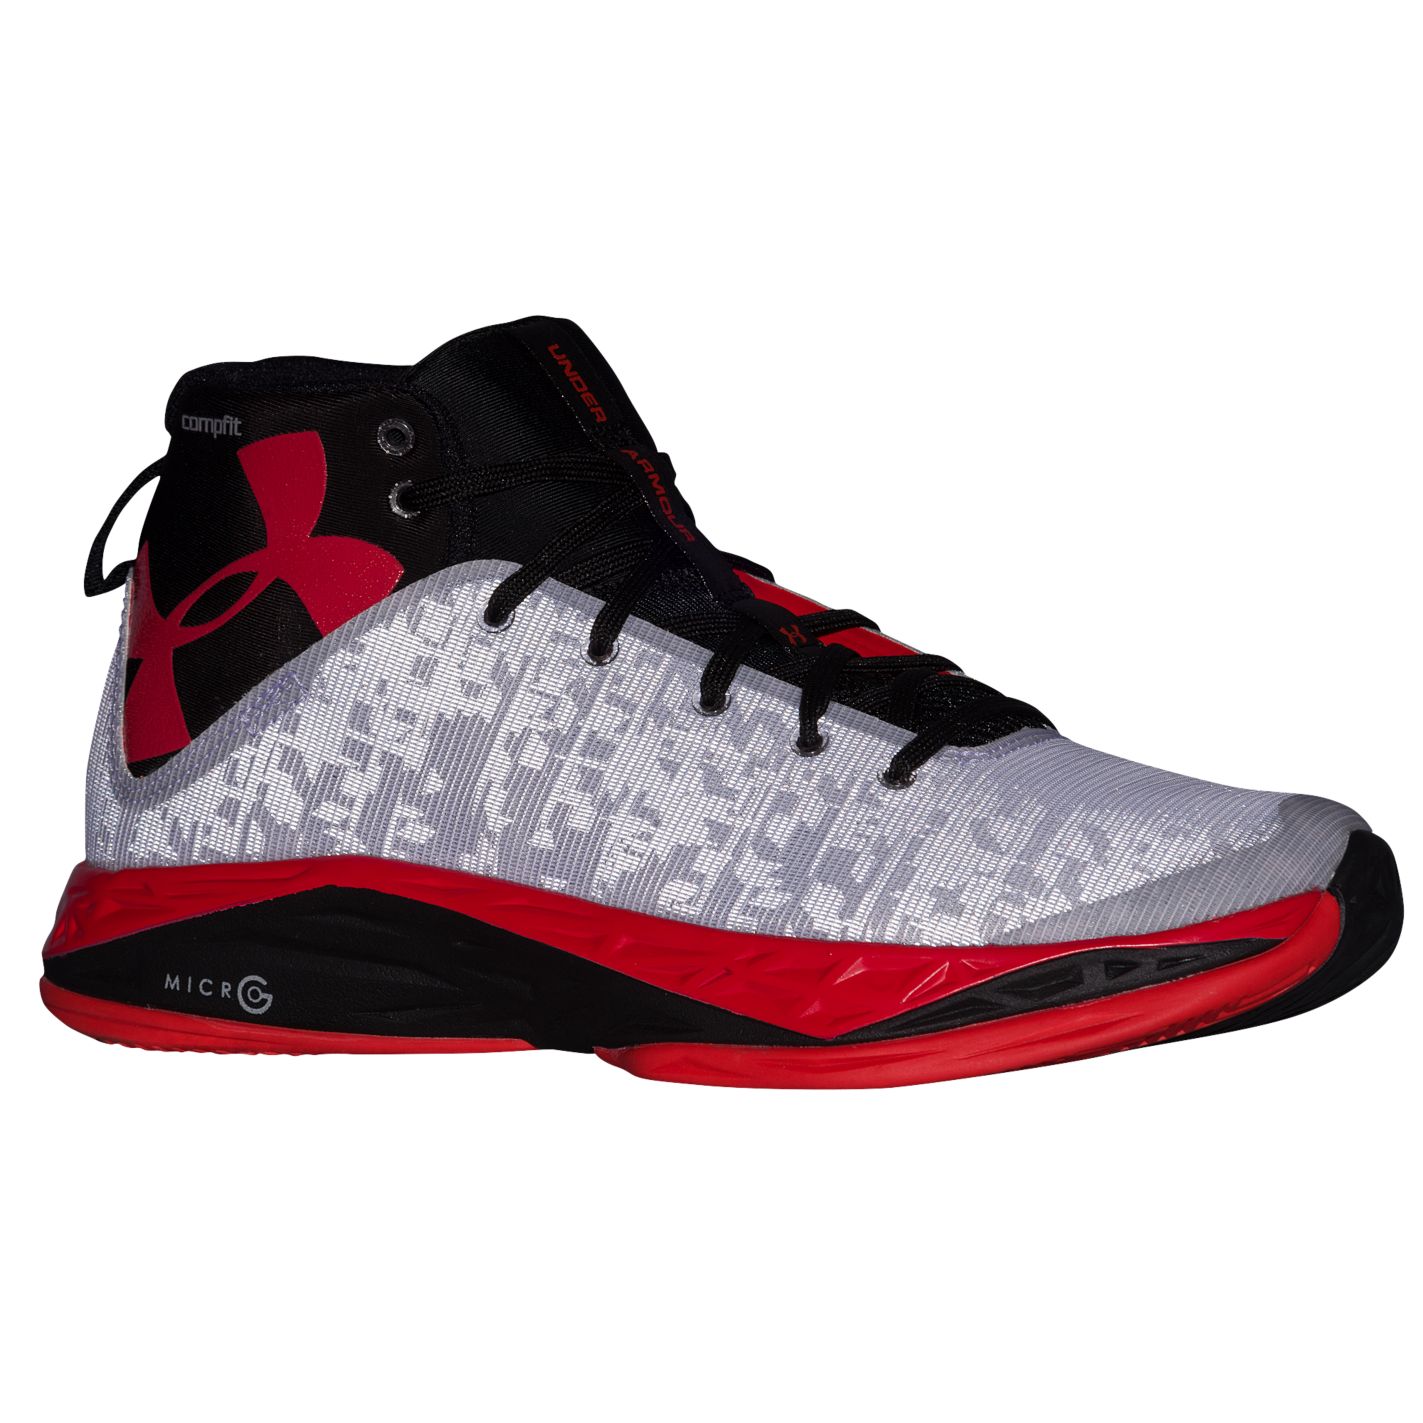 The Under Armour Fire Shot is Available Now 2